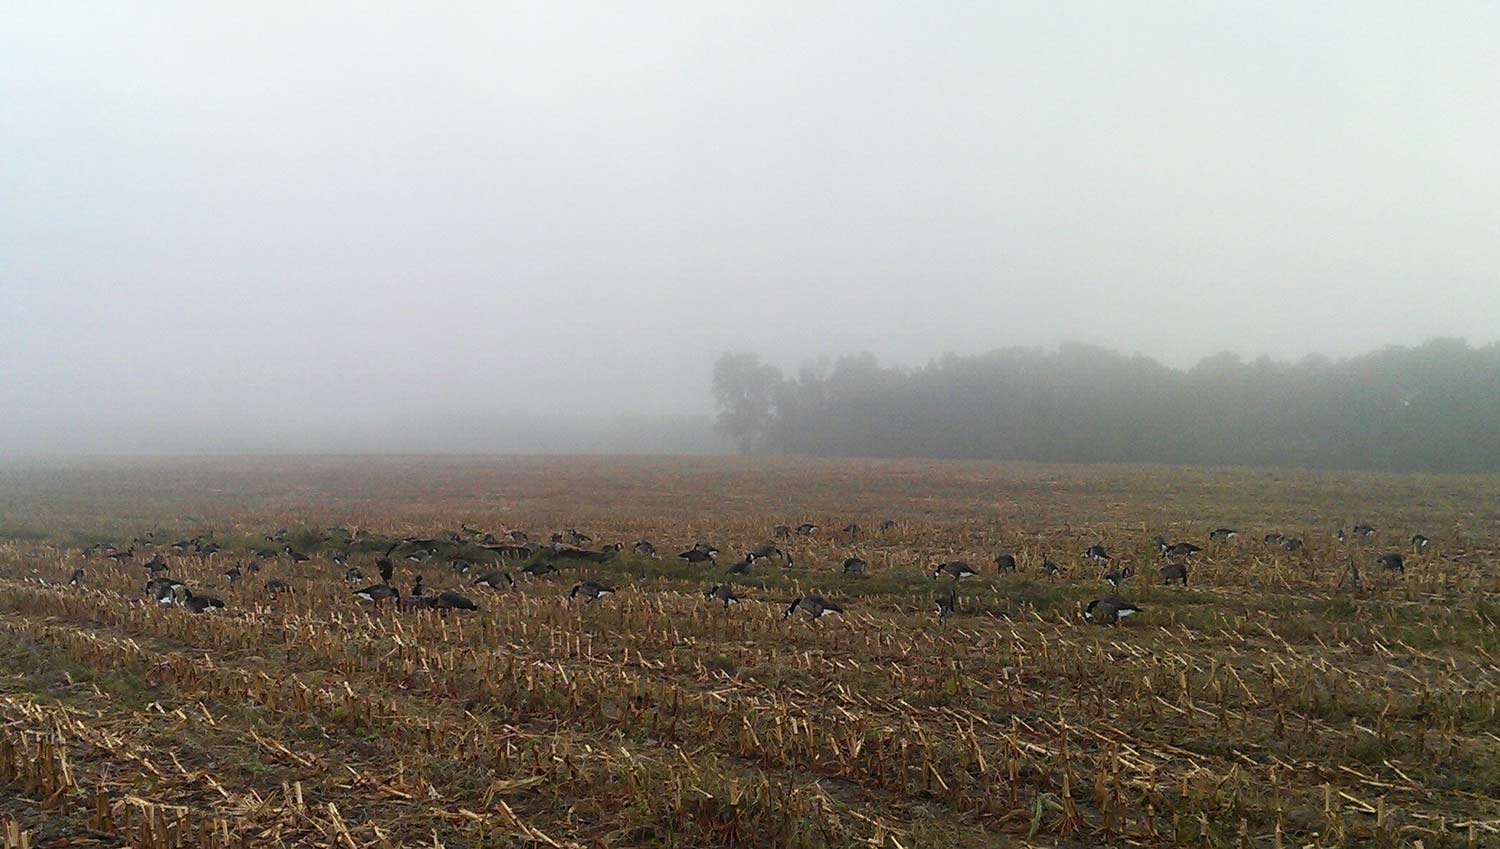 geese hunting in a field